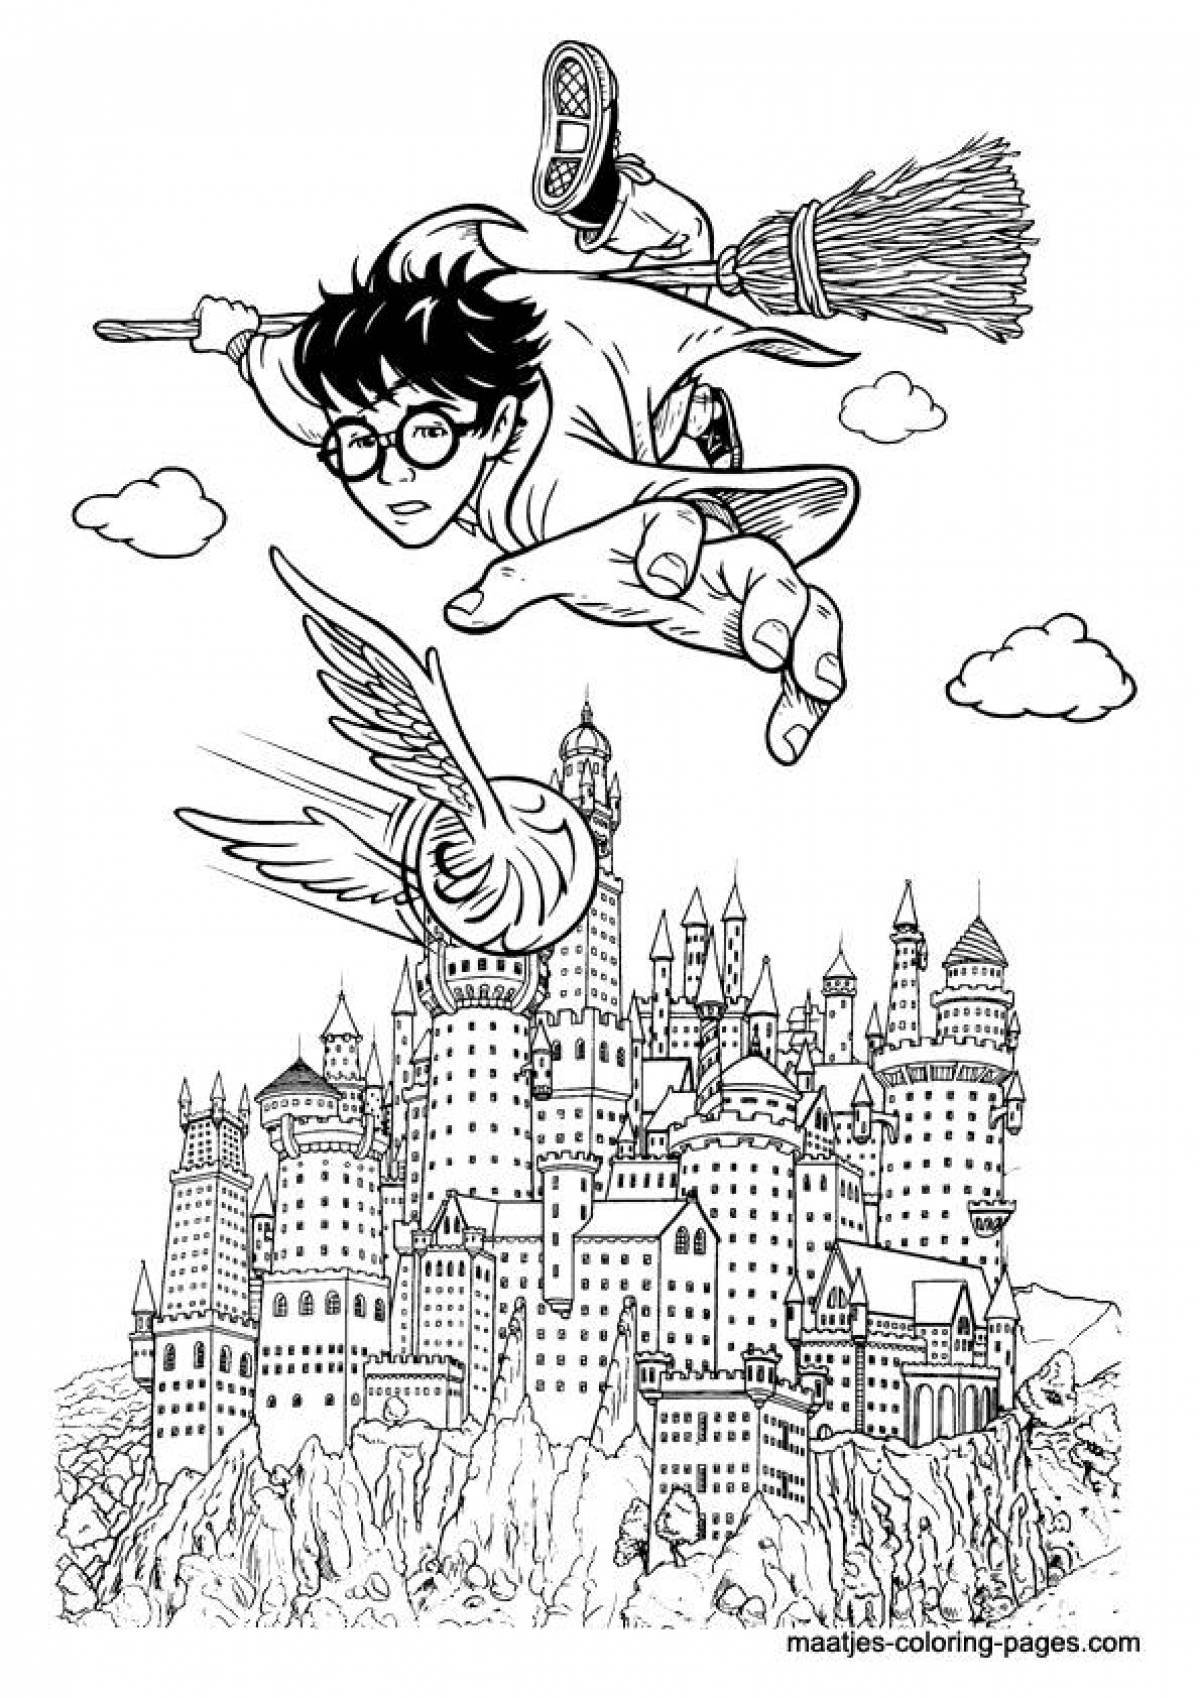 Great harry potter coloring book for kids